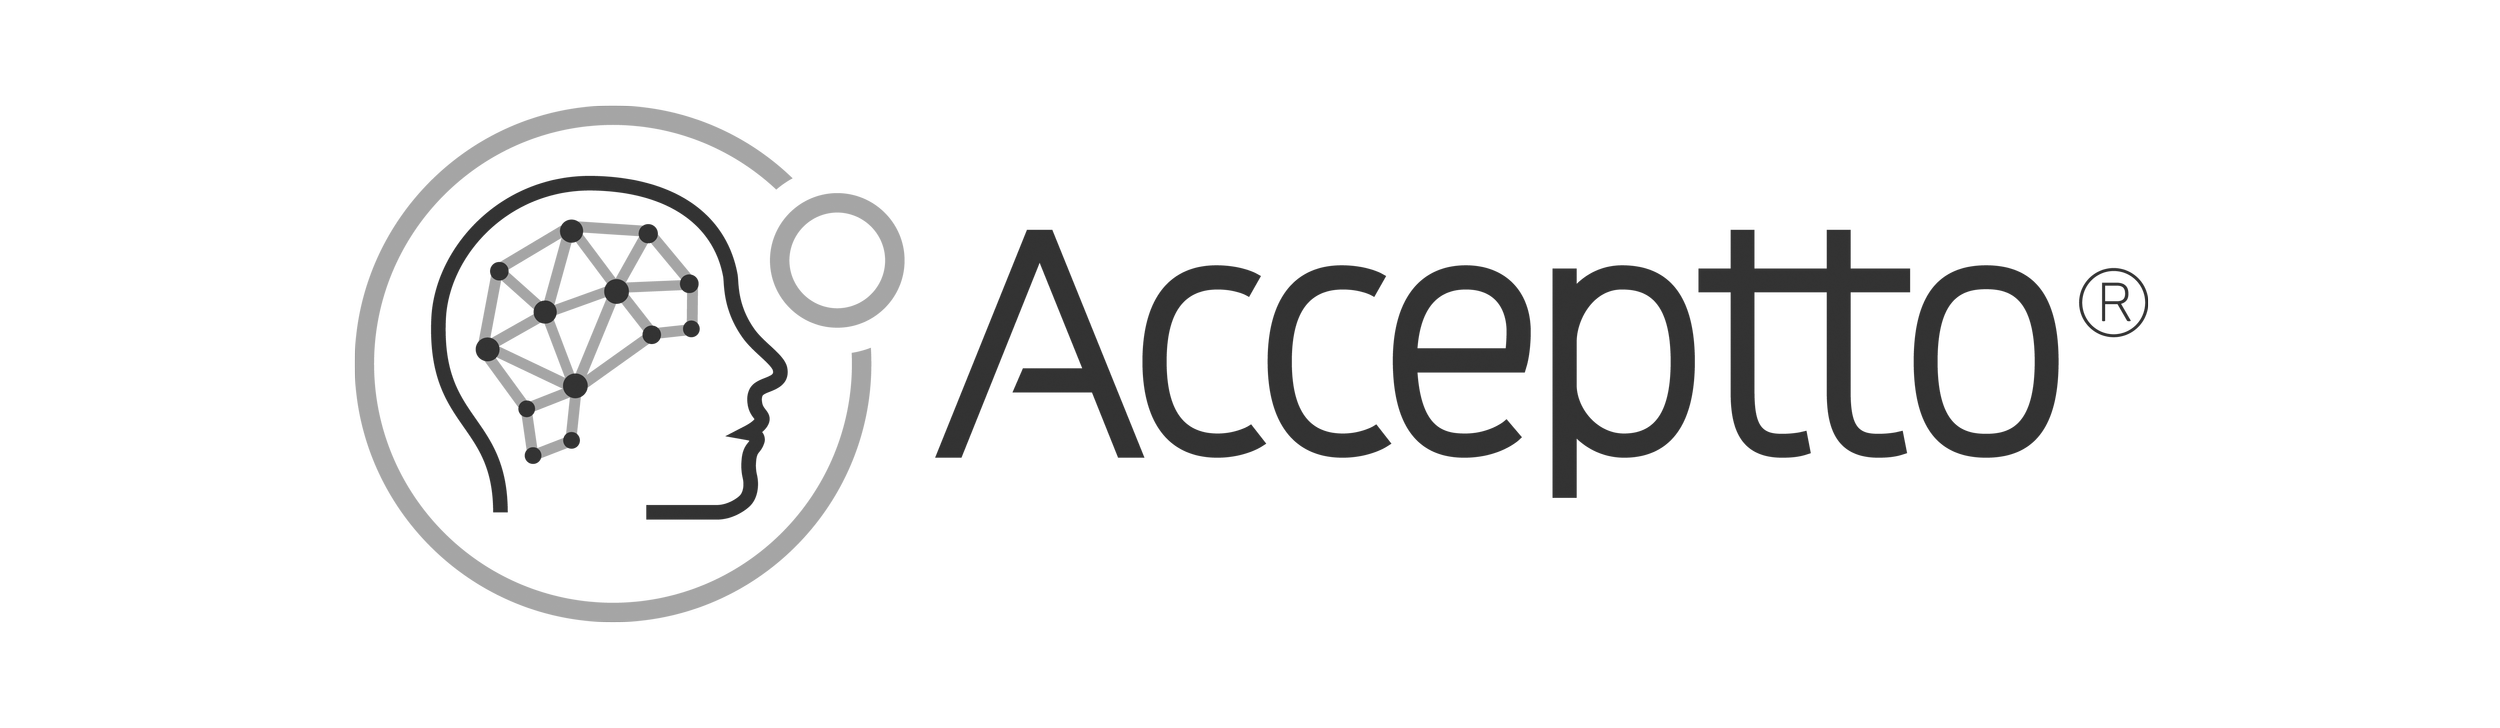 Acceptto20-Wordmark-BW.png